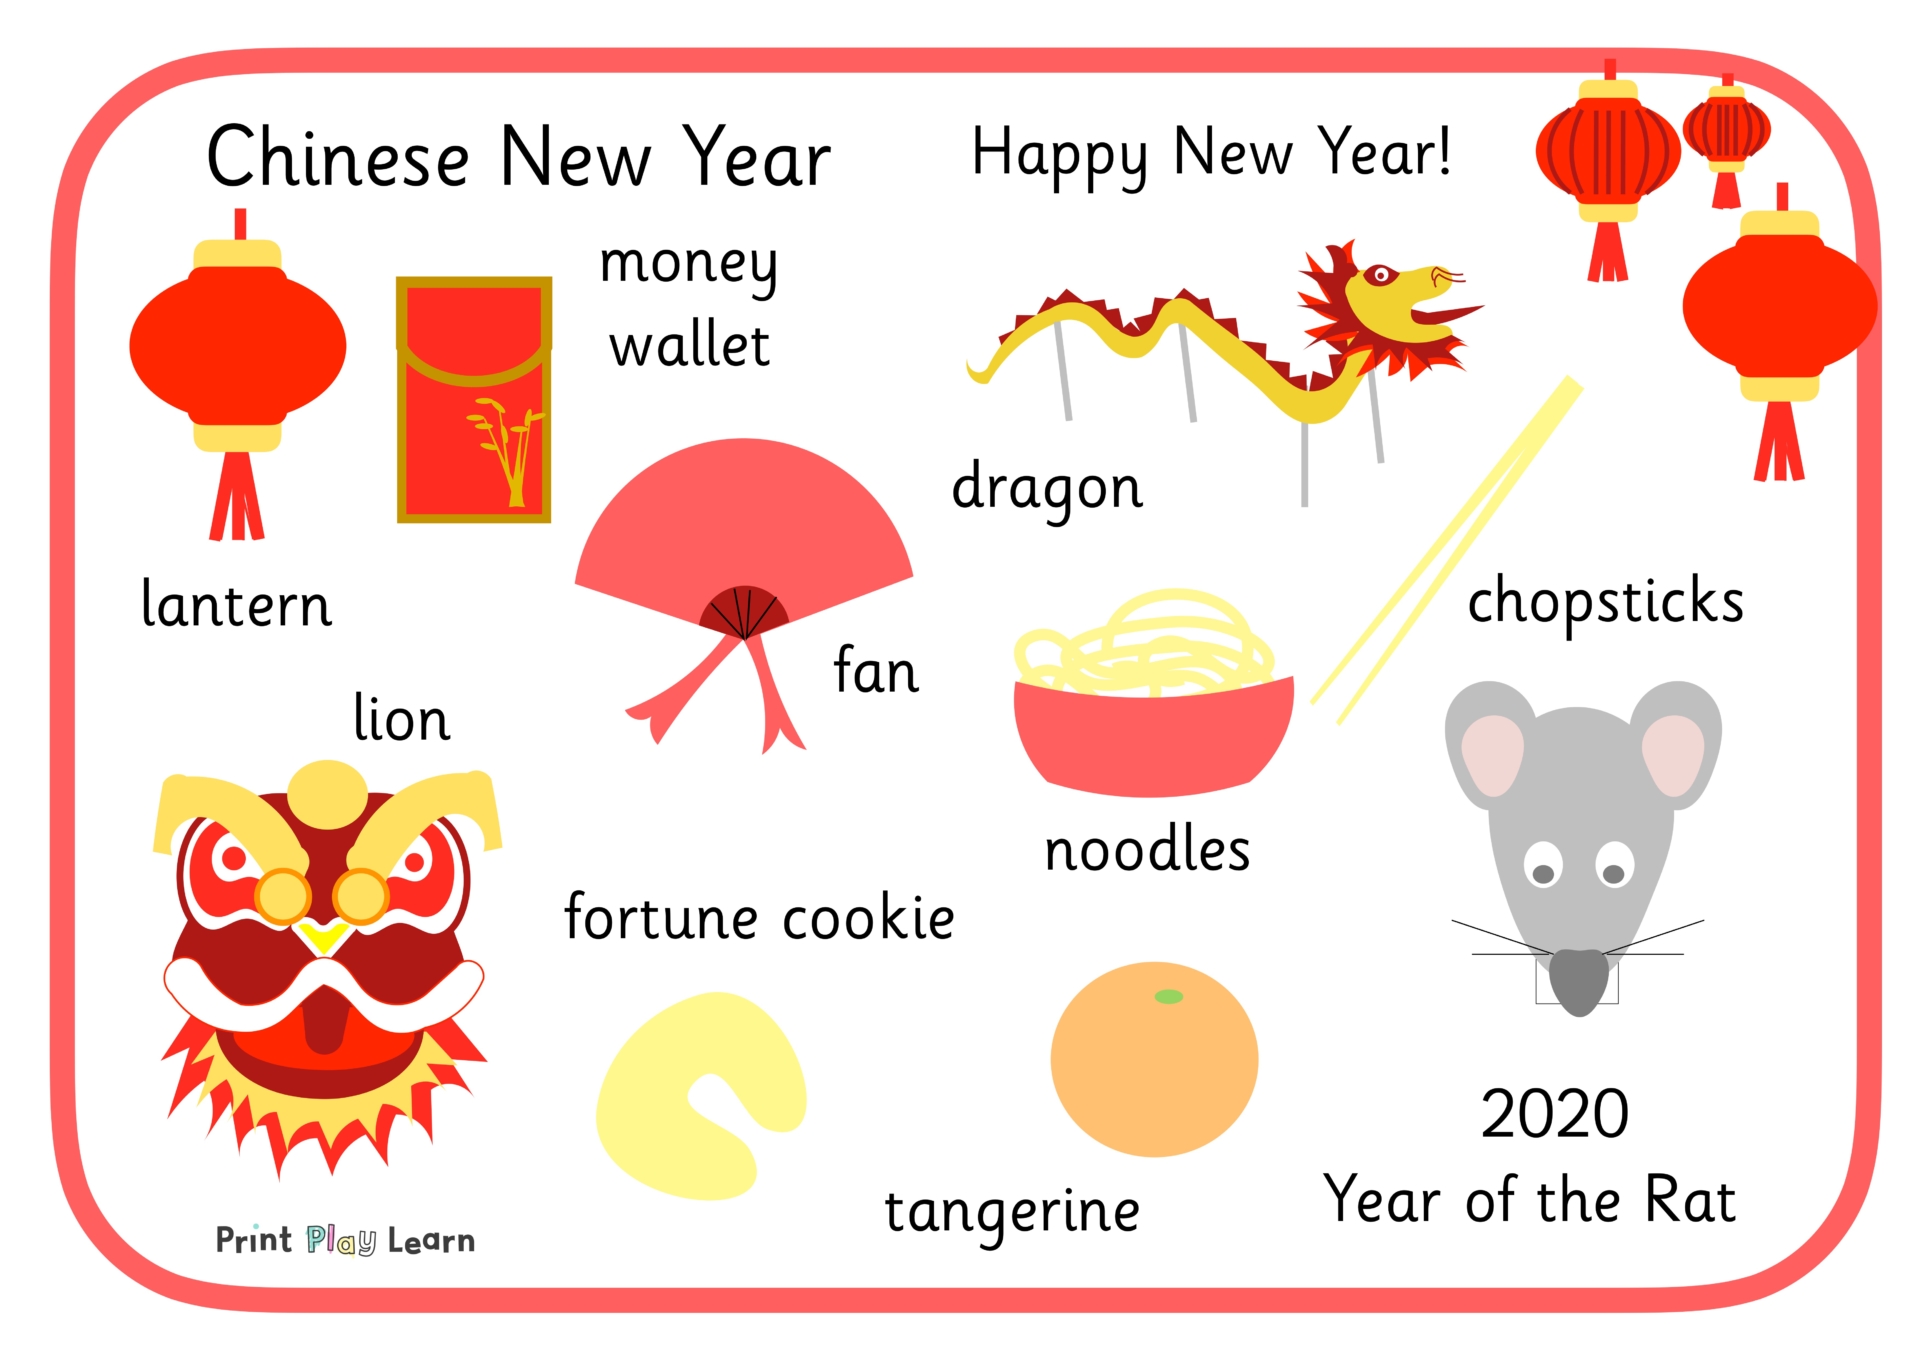 Chinese Word Mat 2020 - Printable Teaching Resources - Print Play Learn1920 x 1358